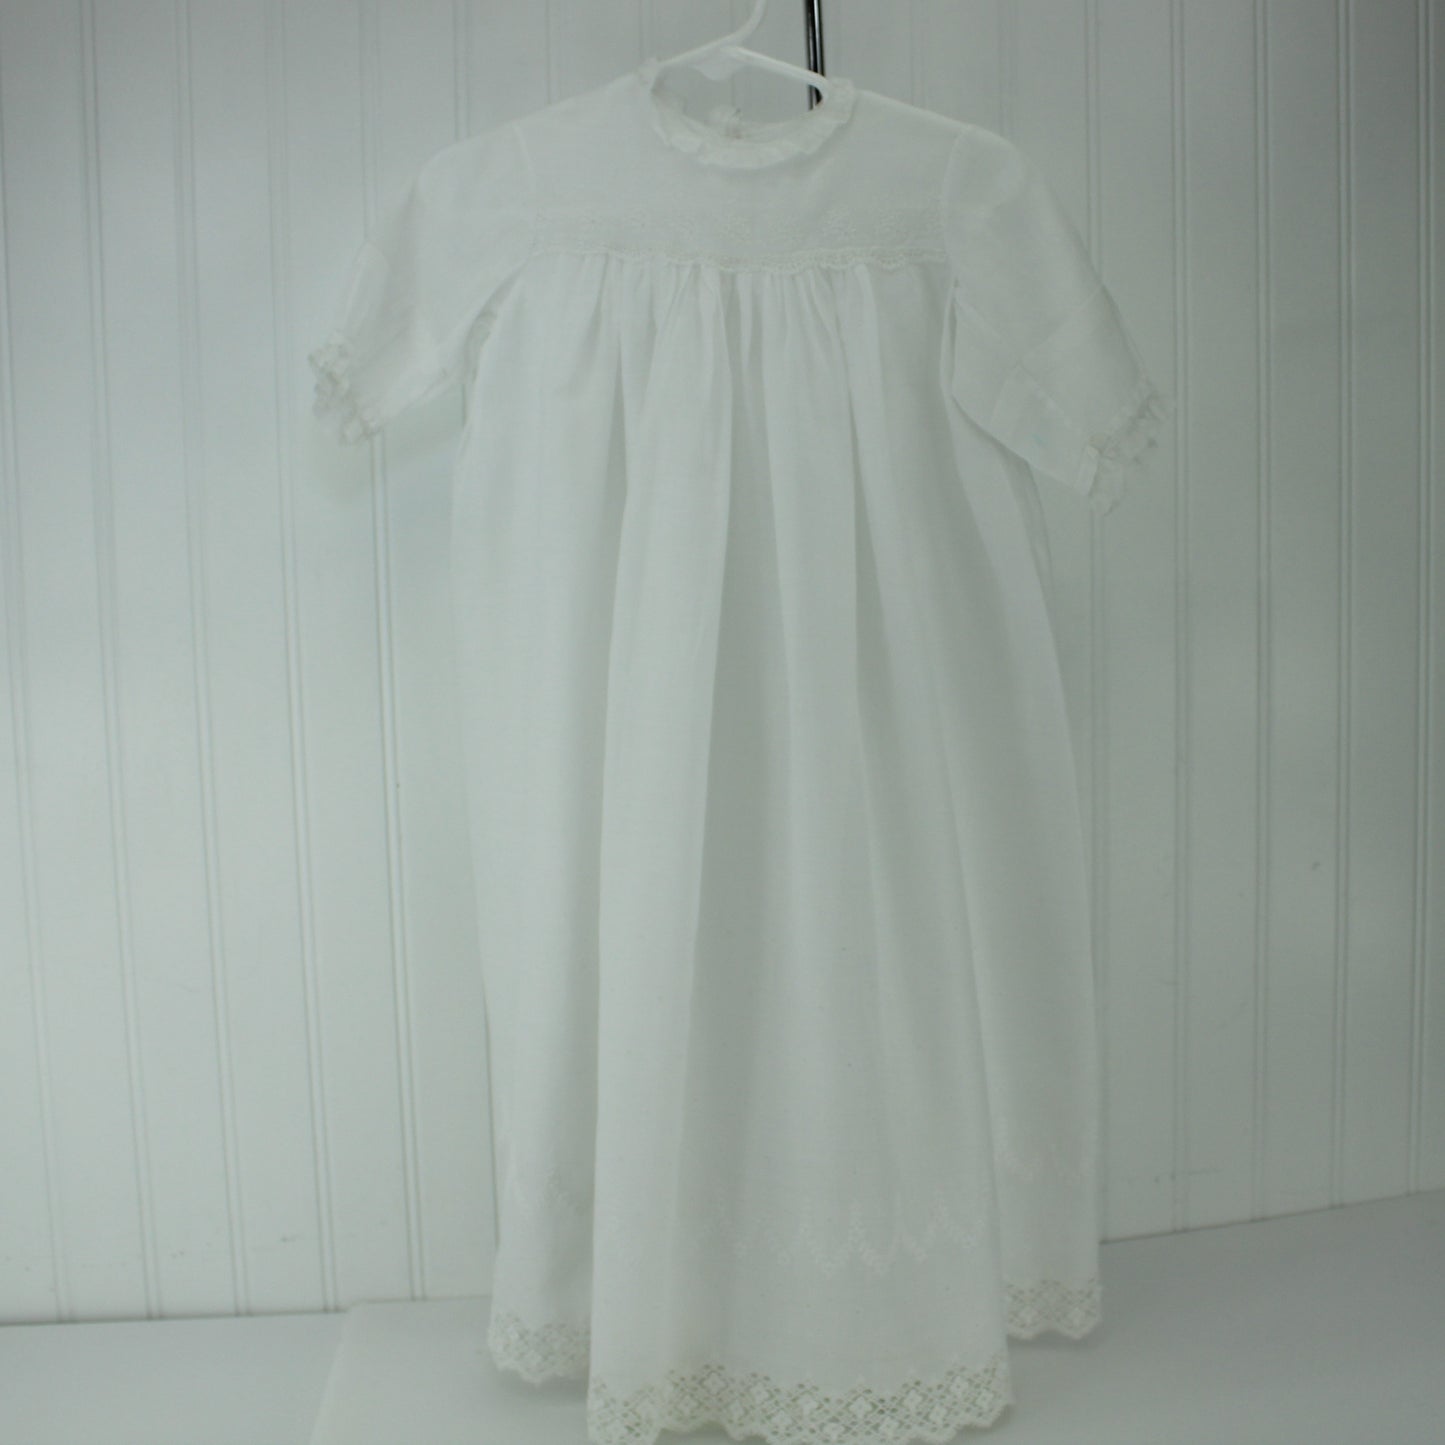 Collection 5 Pieces Infant Victorian Christening Summer Dresses Lace Embroidery Organdy Great for Large Dolls beautiful period clothes for large dolls